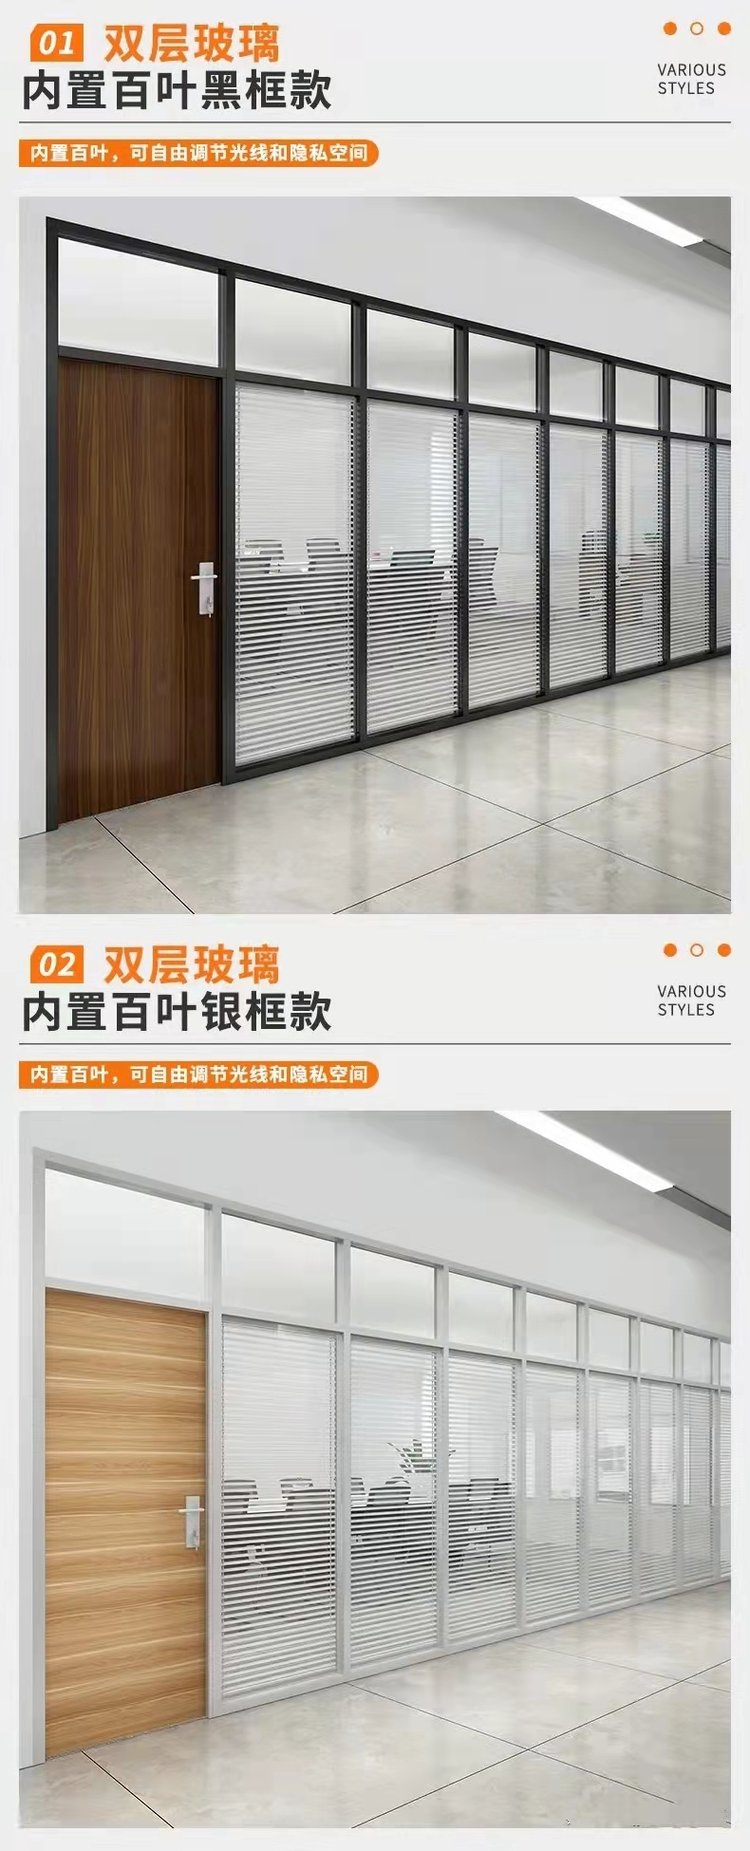 Liujiayao partition wall demolition nearby decoration company decoration services